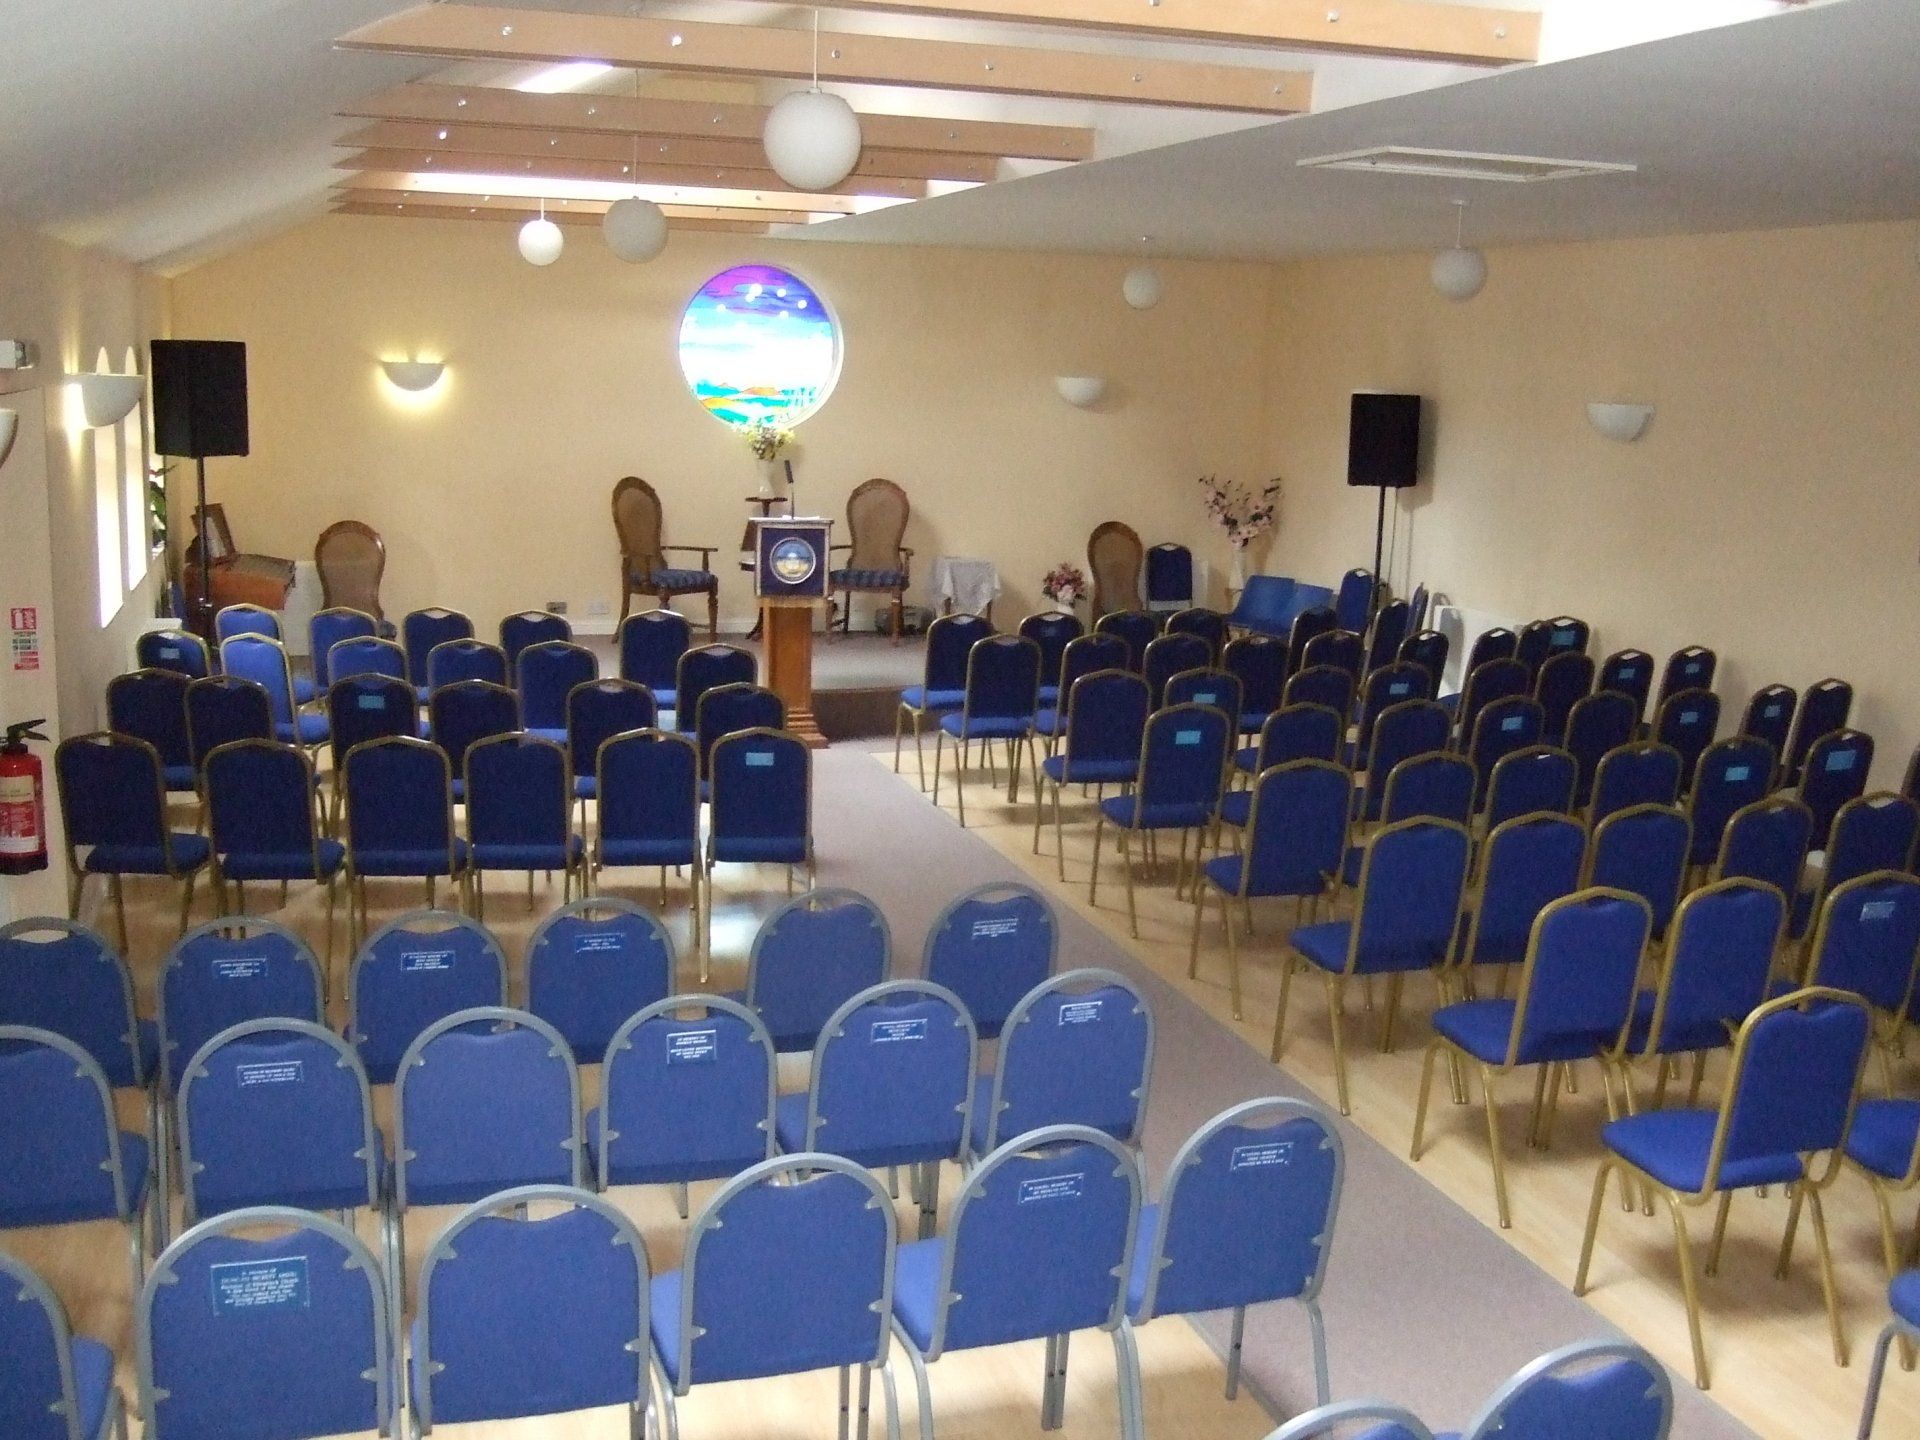 Aberdeen Spiritualist Centre, the hall with podium, stage, and rows of empty chairs